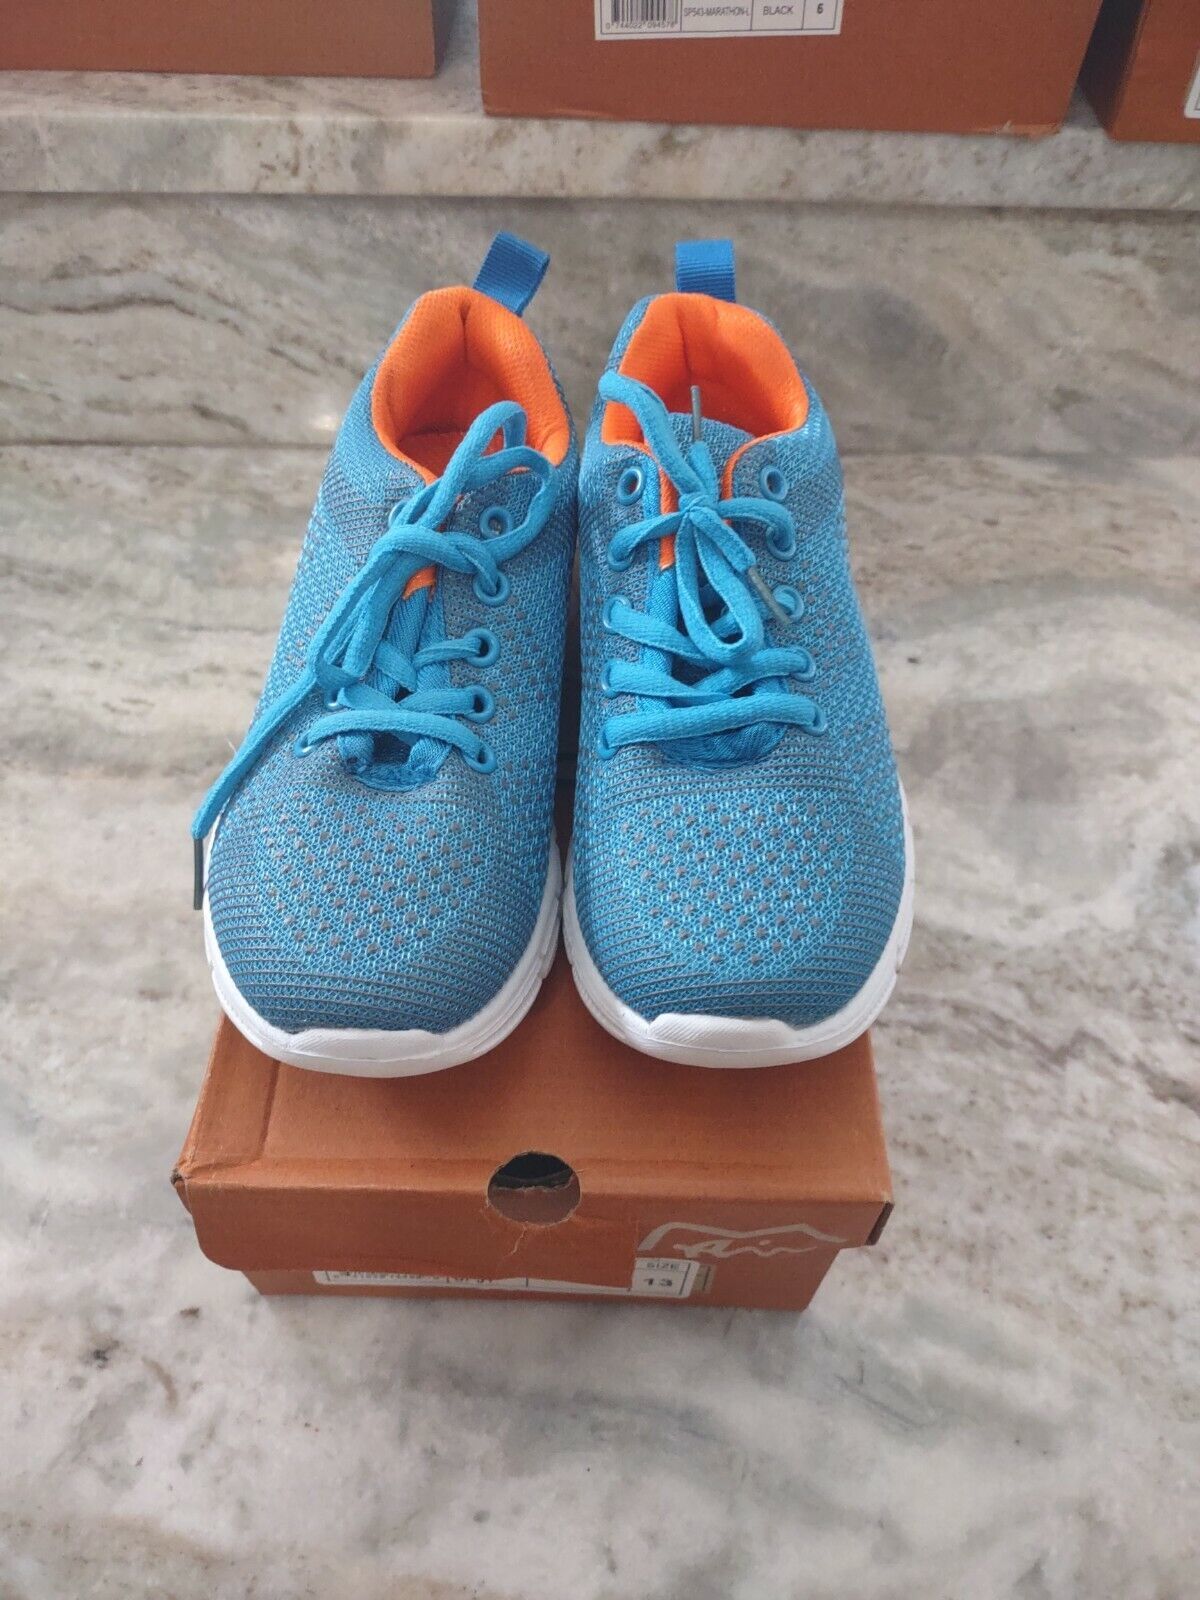 Primary image for Ultracomfort Size 13 Turquoise/Orange Girls Tennis Shoes-Brand New-SHIPS N 24 HR